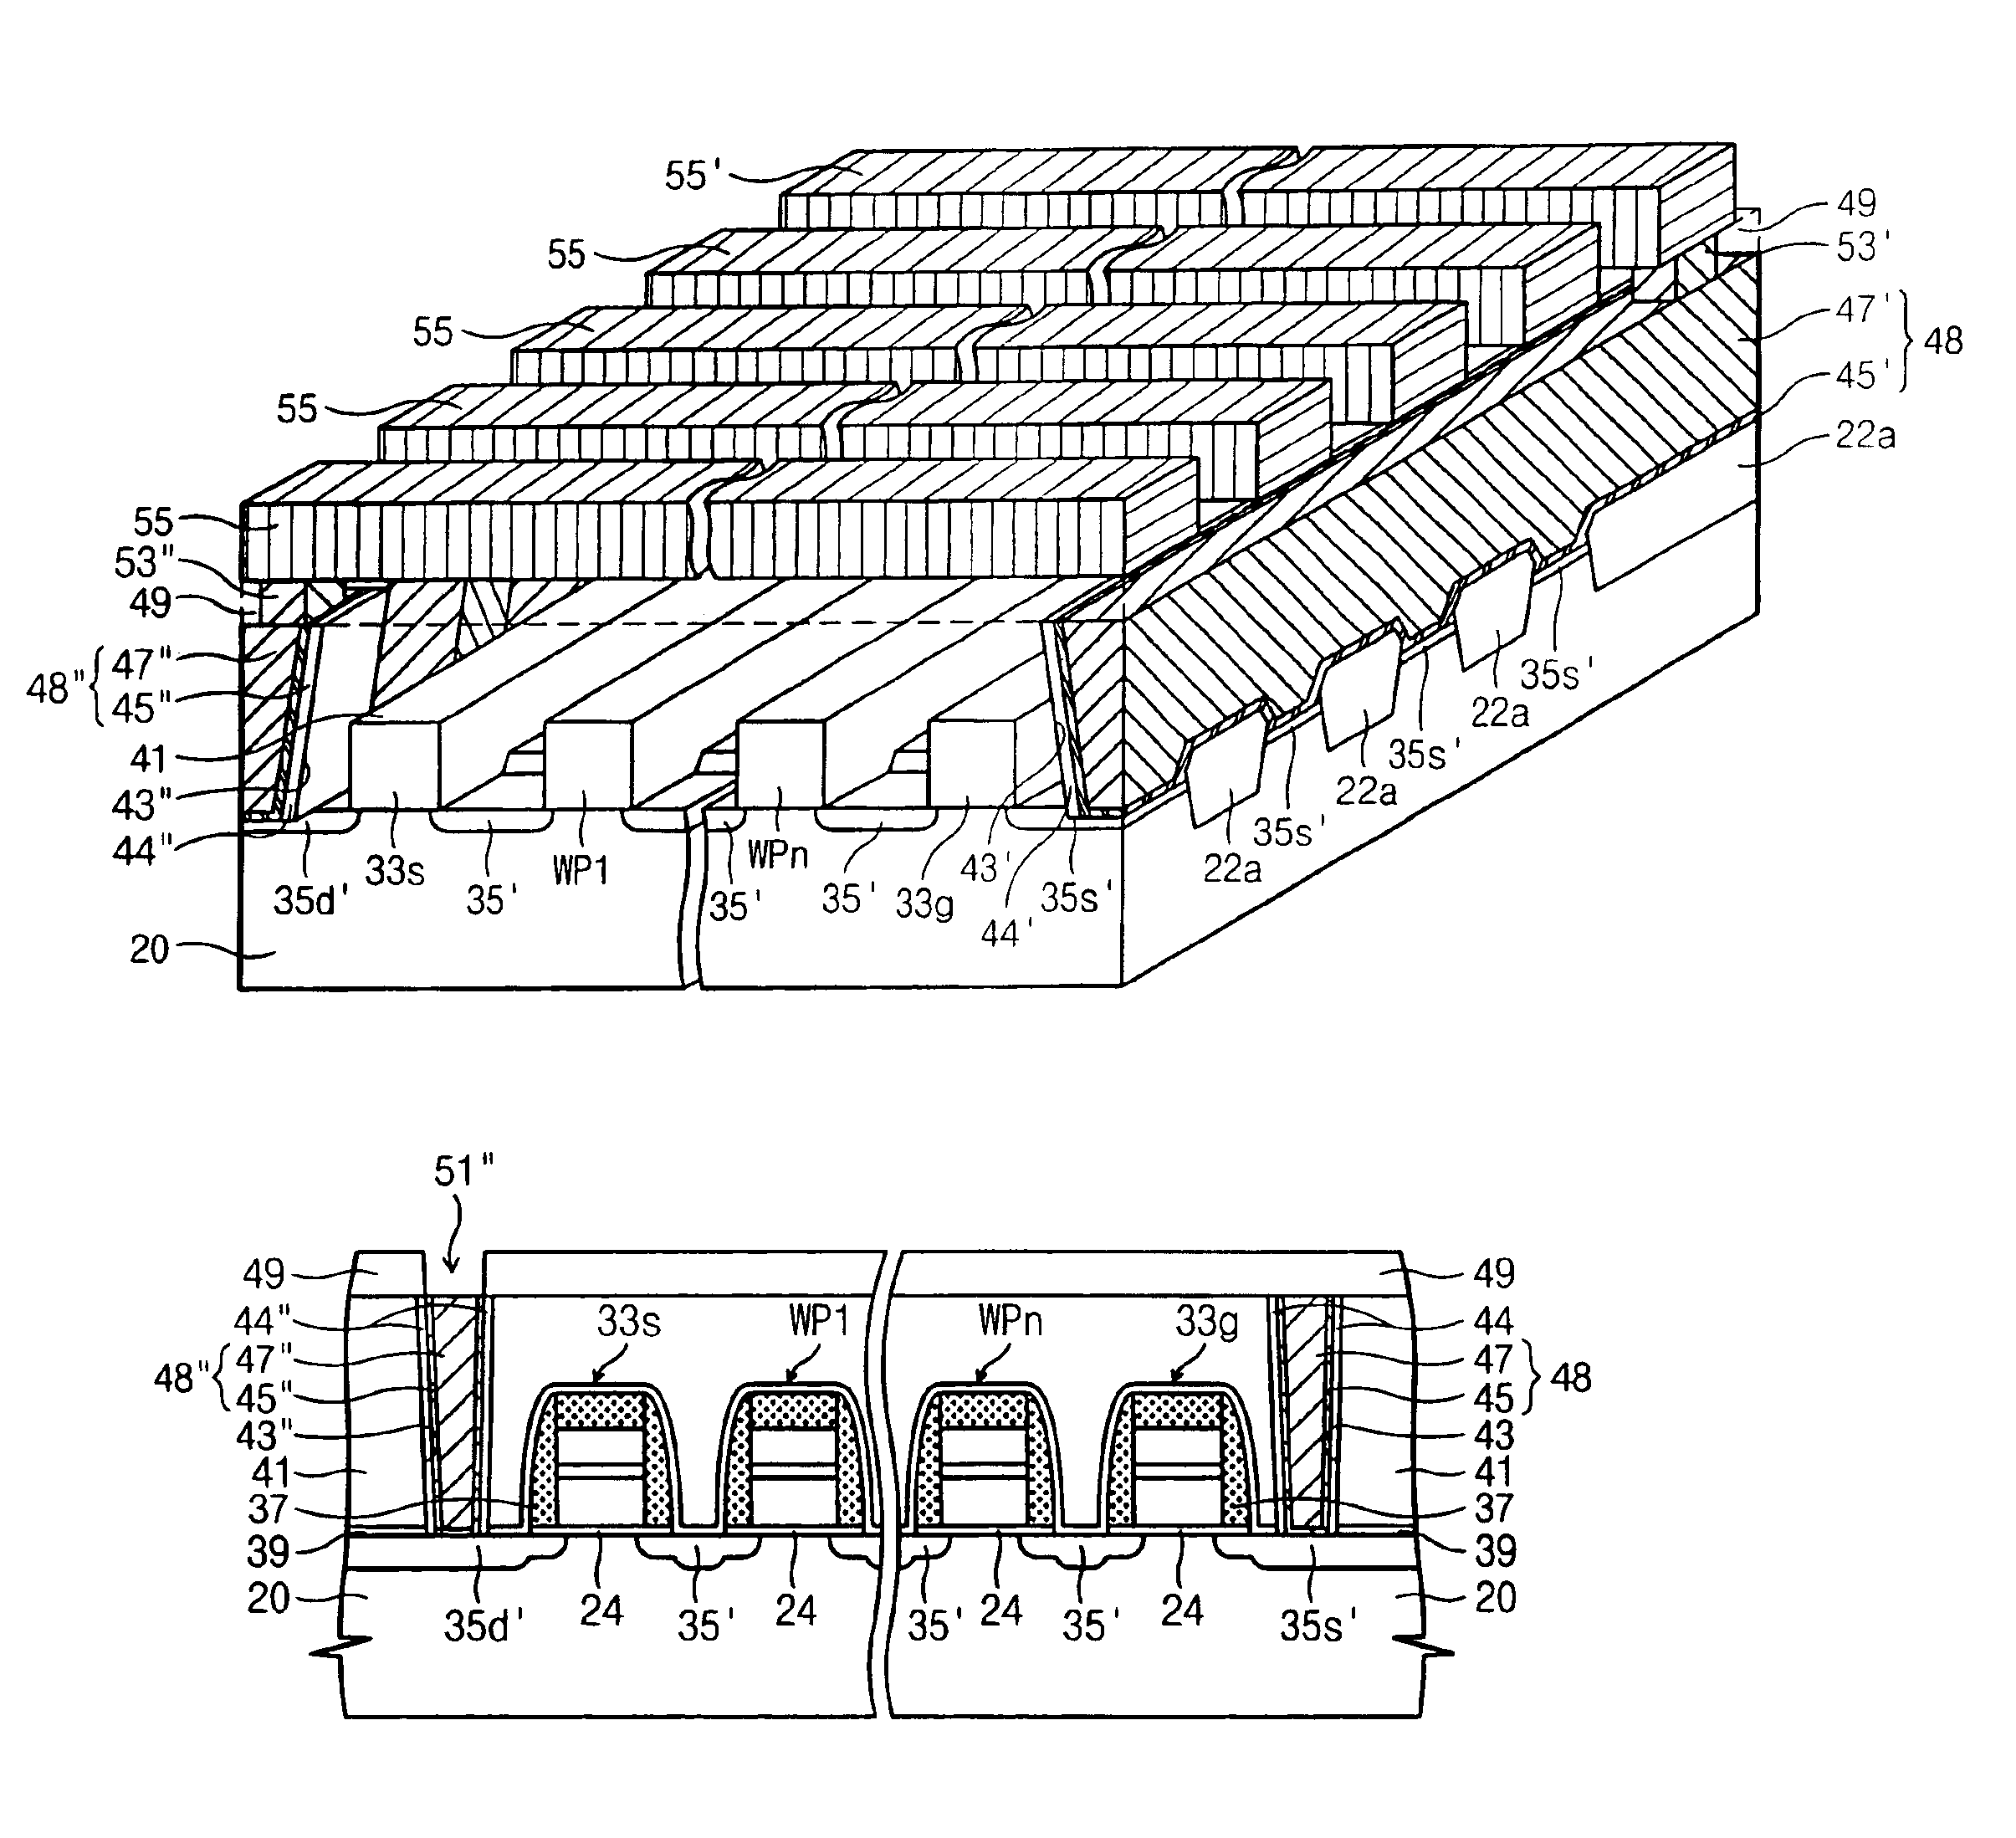 NAND-type flash memory devices and methods of fabricating the same